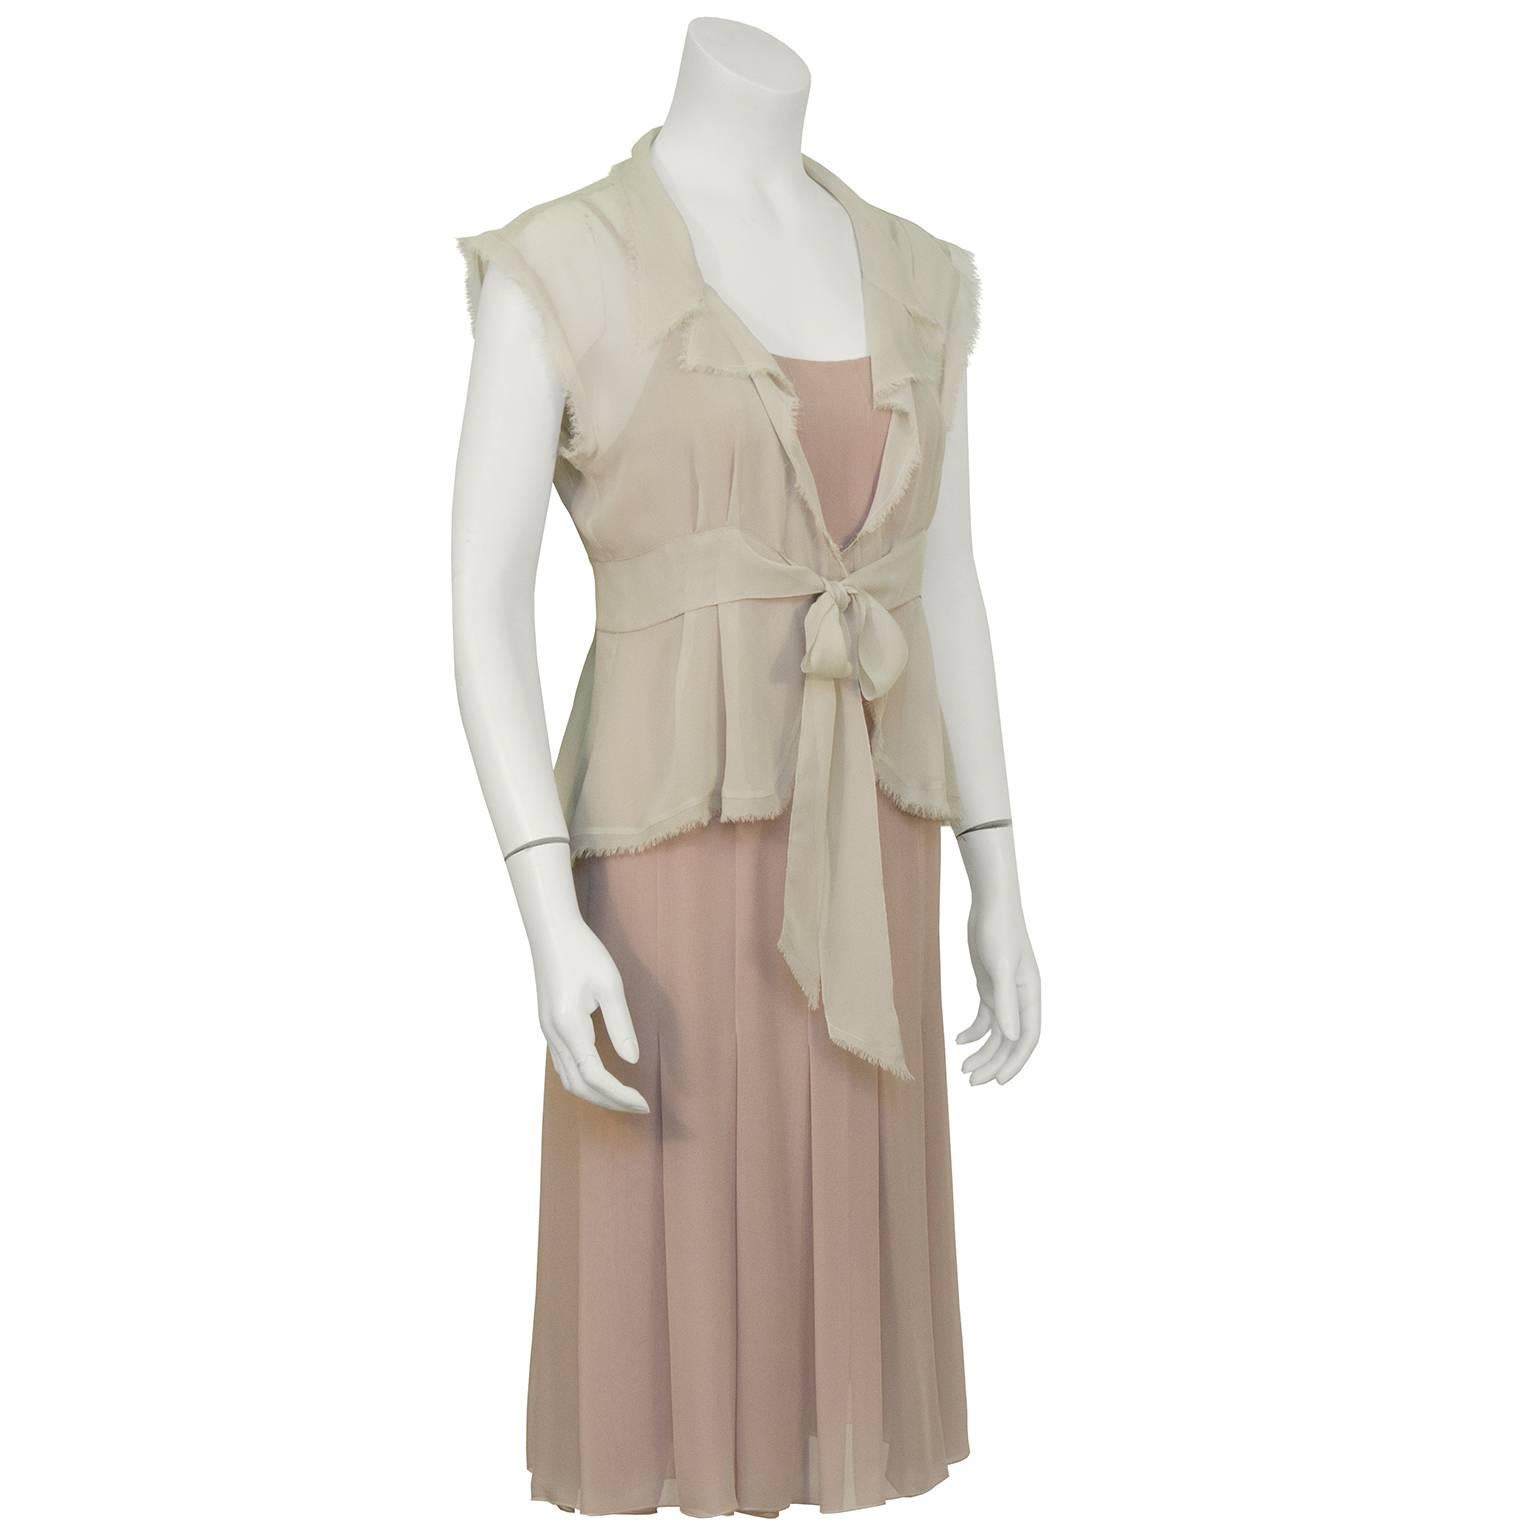 Chanel spring 2004 soft taupe and celadon green silk chiffon 2pc cocktail set. Sleeveless raw edged jacket  with soft single lapel and self tie at waist, unlined. Coordinating sleeveless dress in pale taupe, spaghetti strap, fully lined with